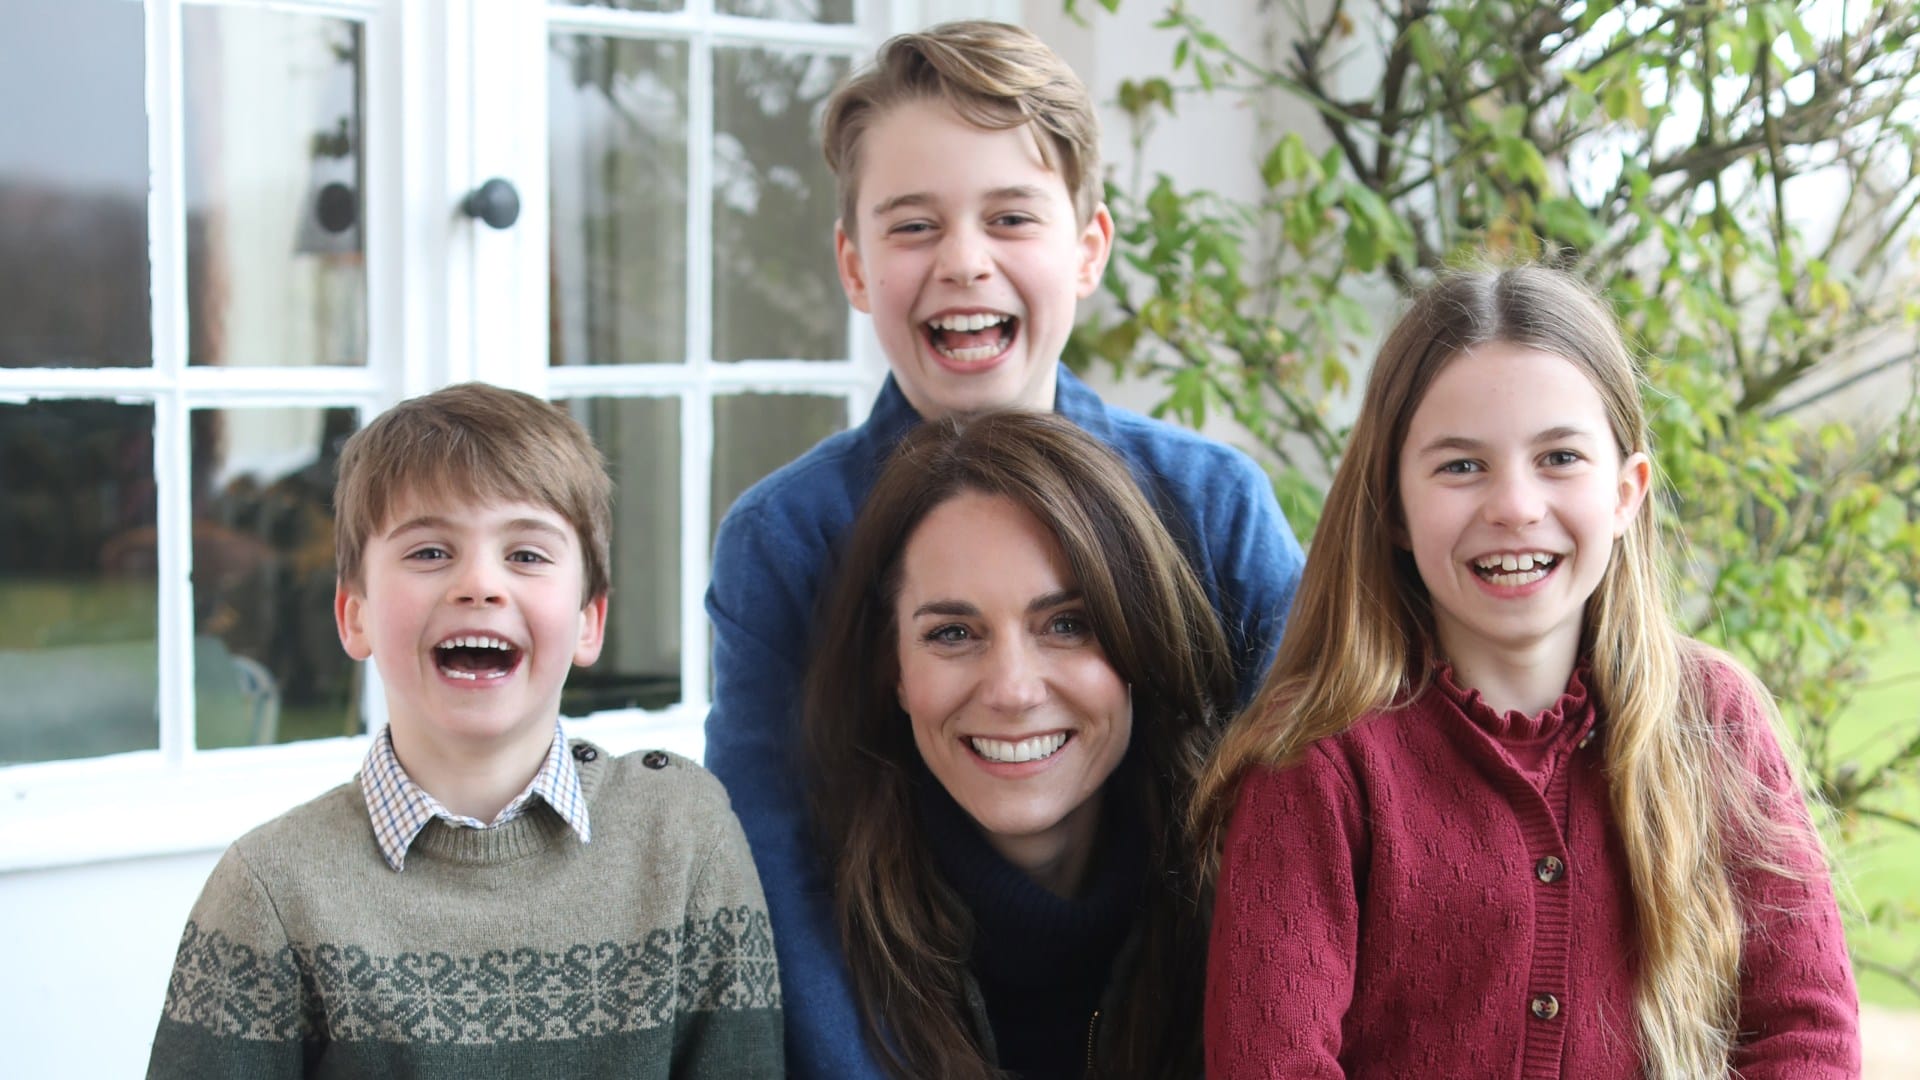 Kate Middleton forced to respond after fans blasted ‘editing fails’ in her Mother’s Day photo